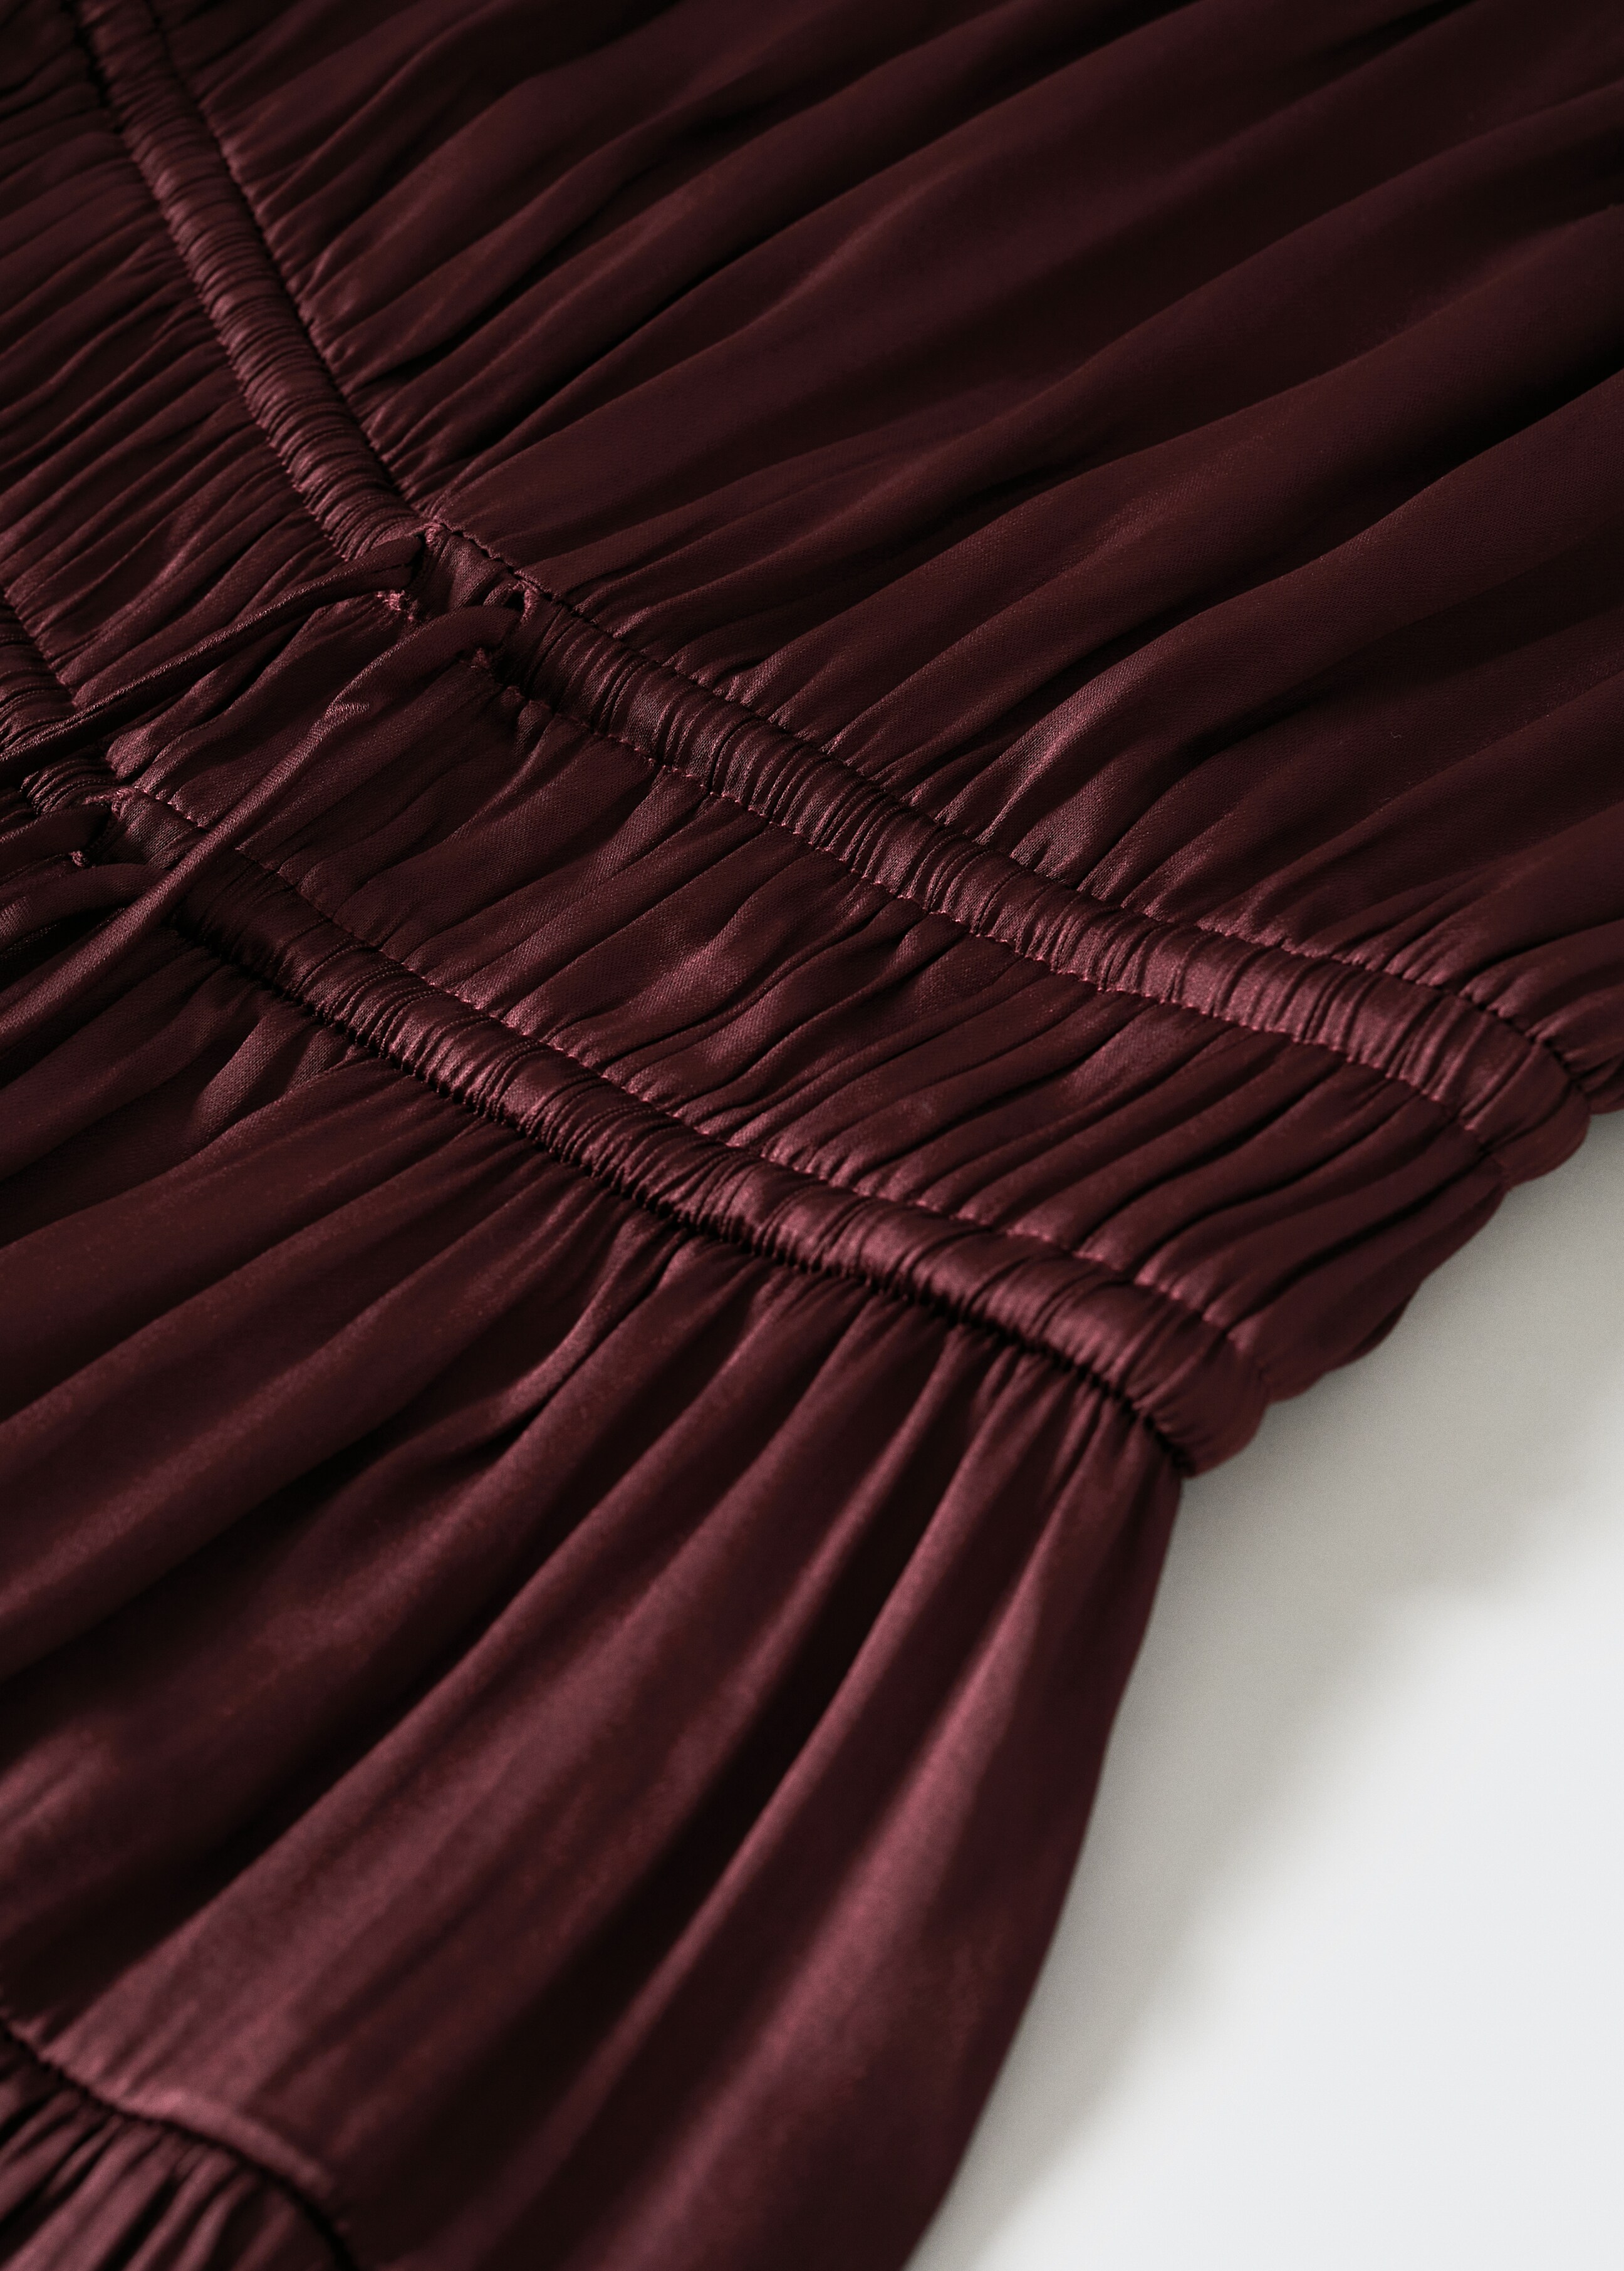 Pleated satin dress - Details of the article 8